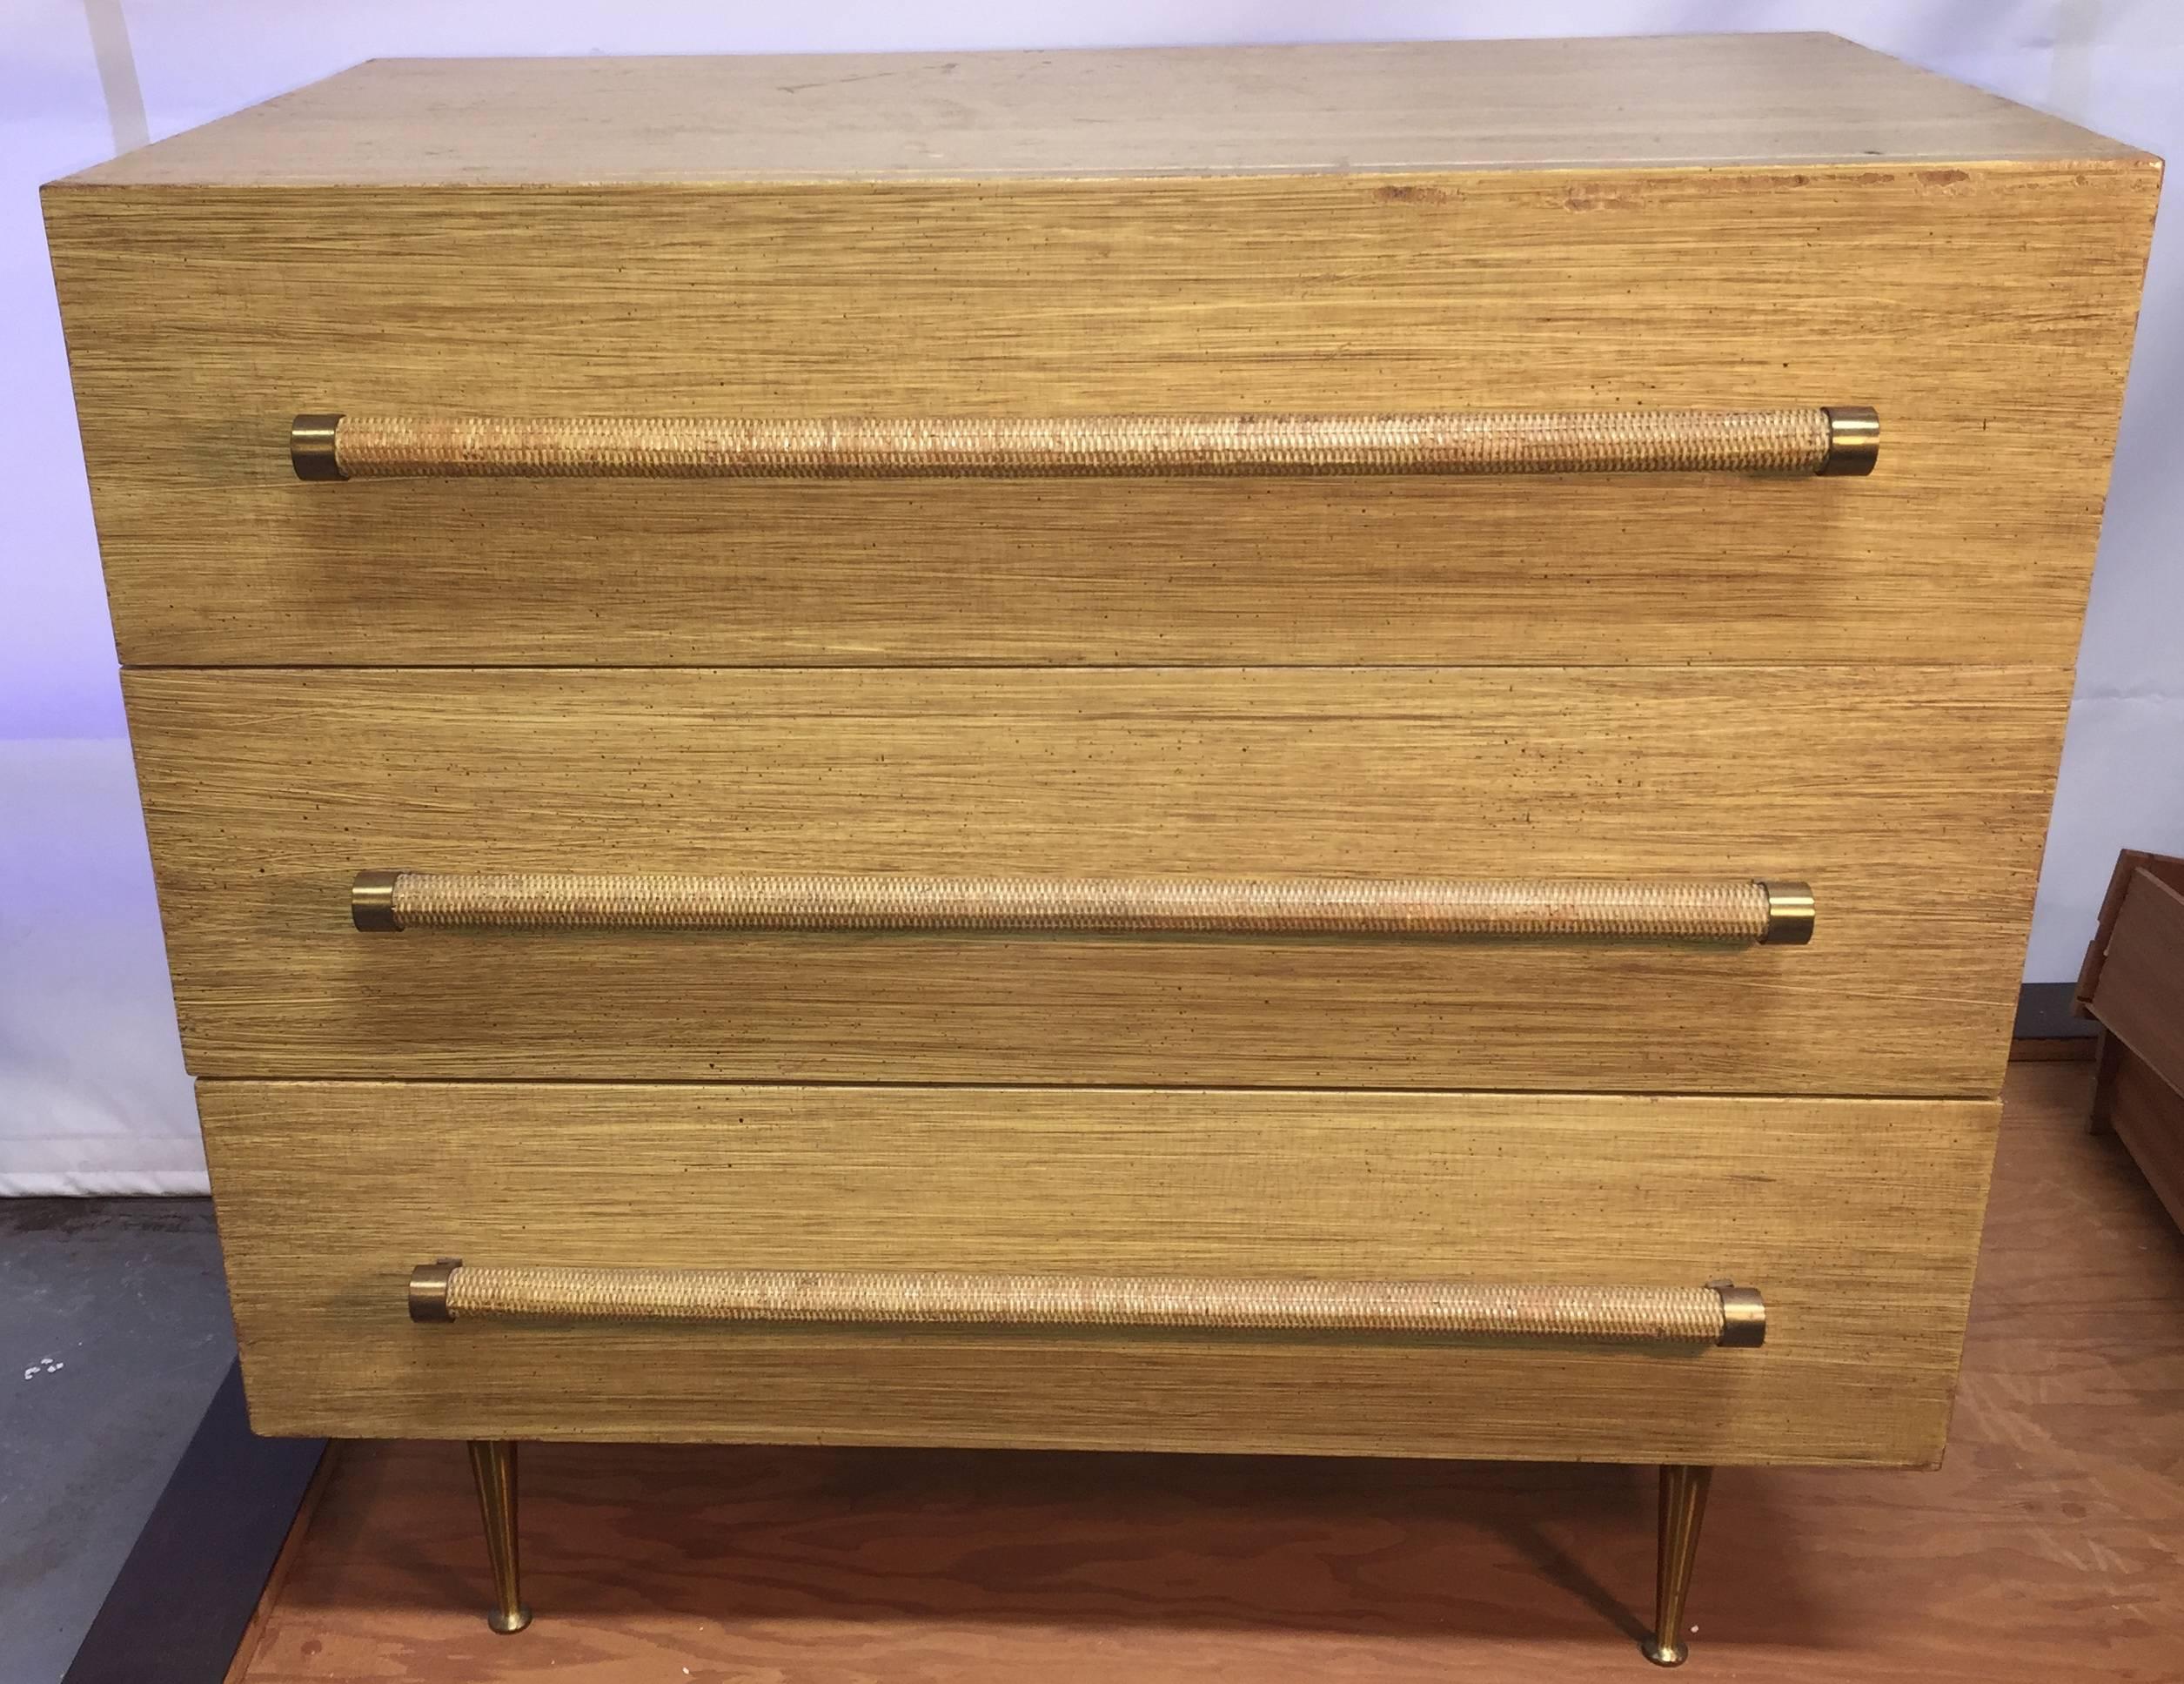 Classic chest for Widdicomb with cane or rattan-wrapped handles and brass feet is distinguished by an amazing period 1950 painted faux mahogany surface over the actual mahogany veneer. Cloth label to inside drawer.